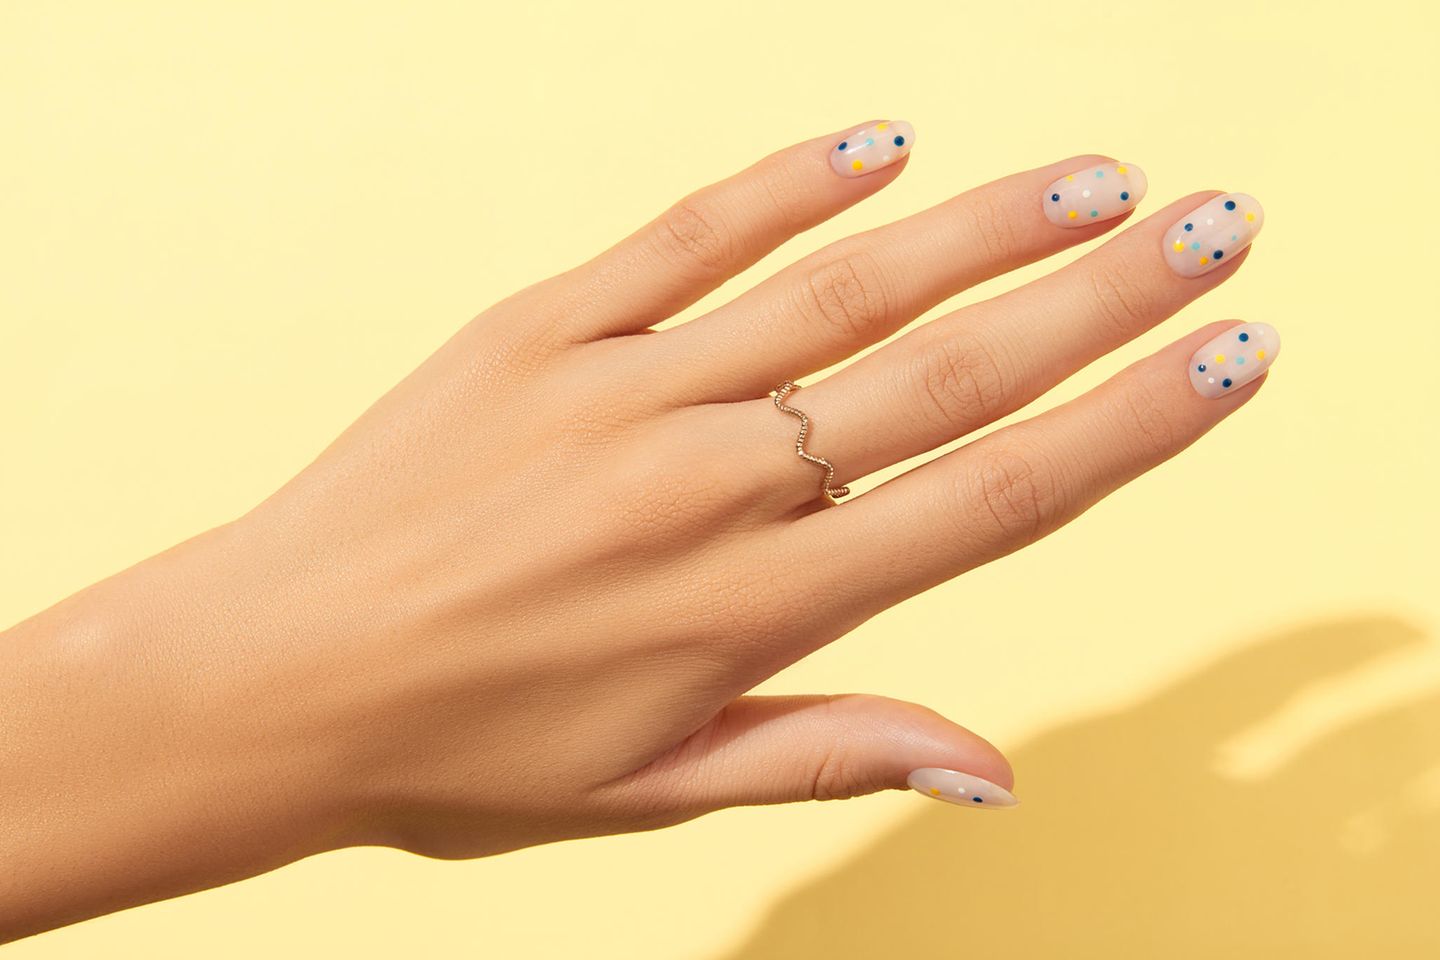 Nail trends 2022: hand with dotted nails on yellow background